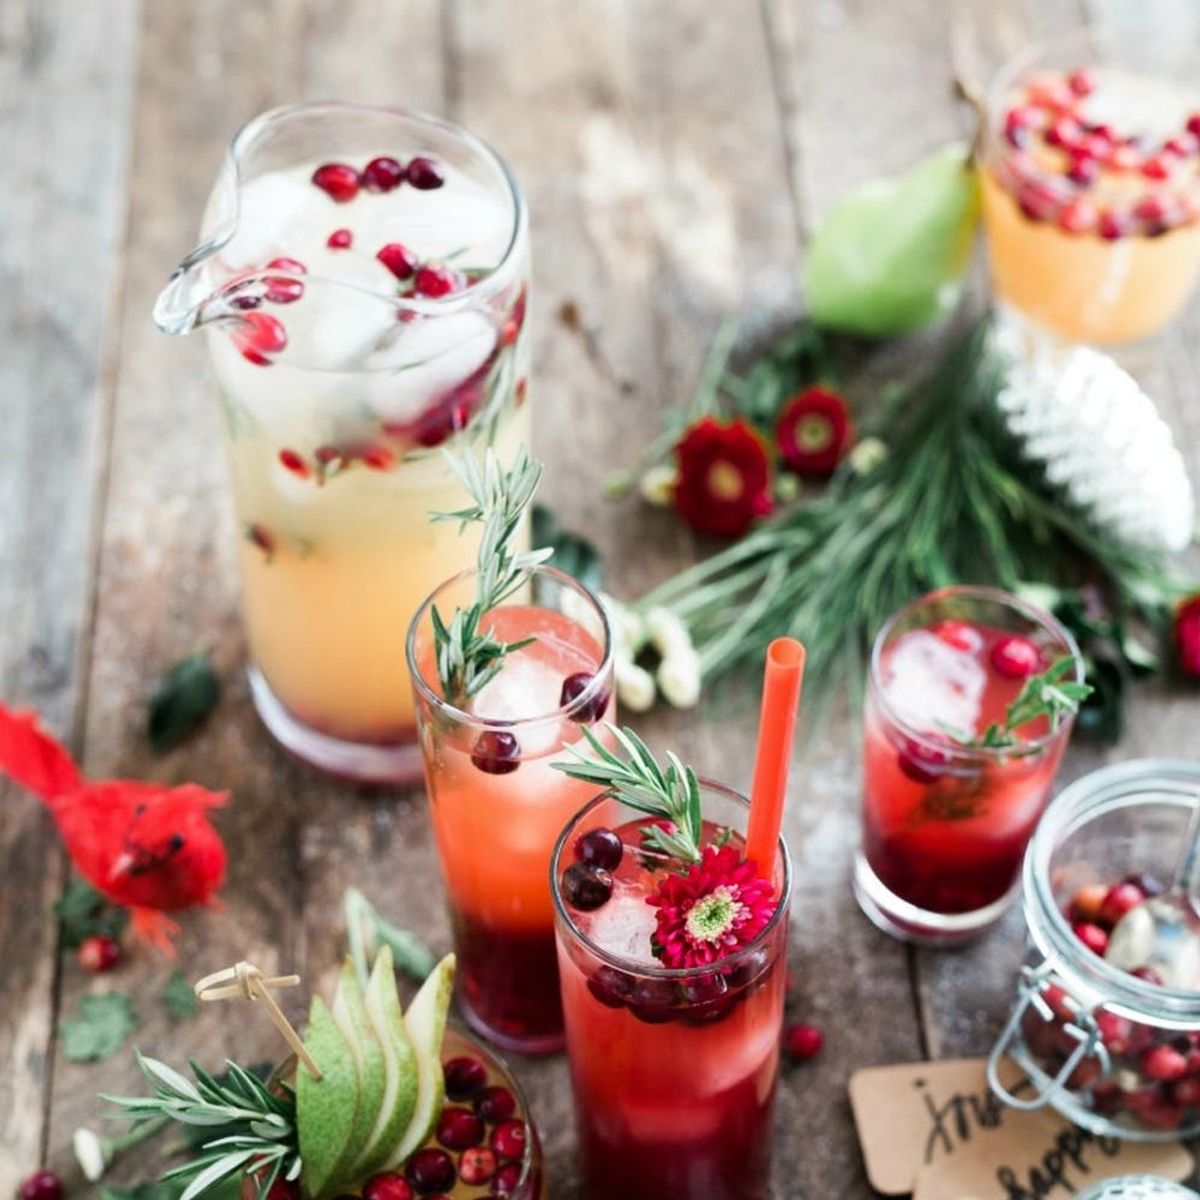 5 Tips for Hosting a Stress-Free, Last-Minute Holiday Party